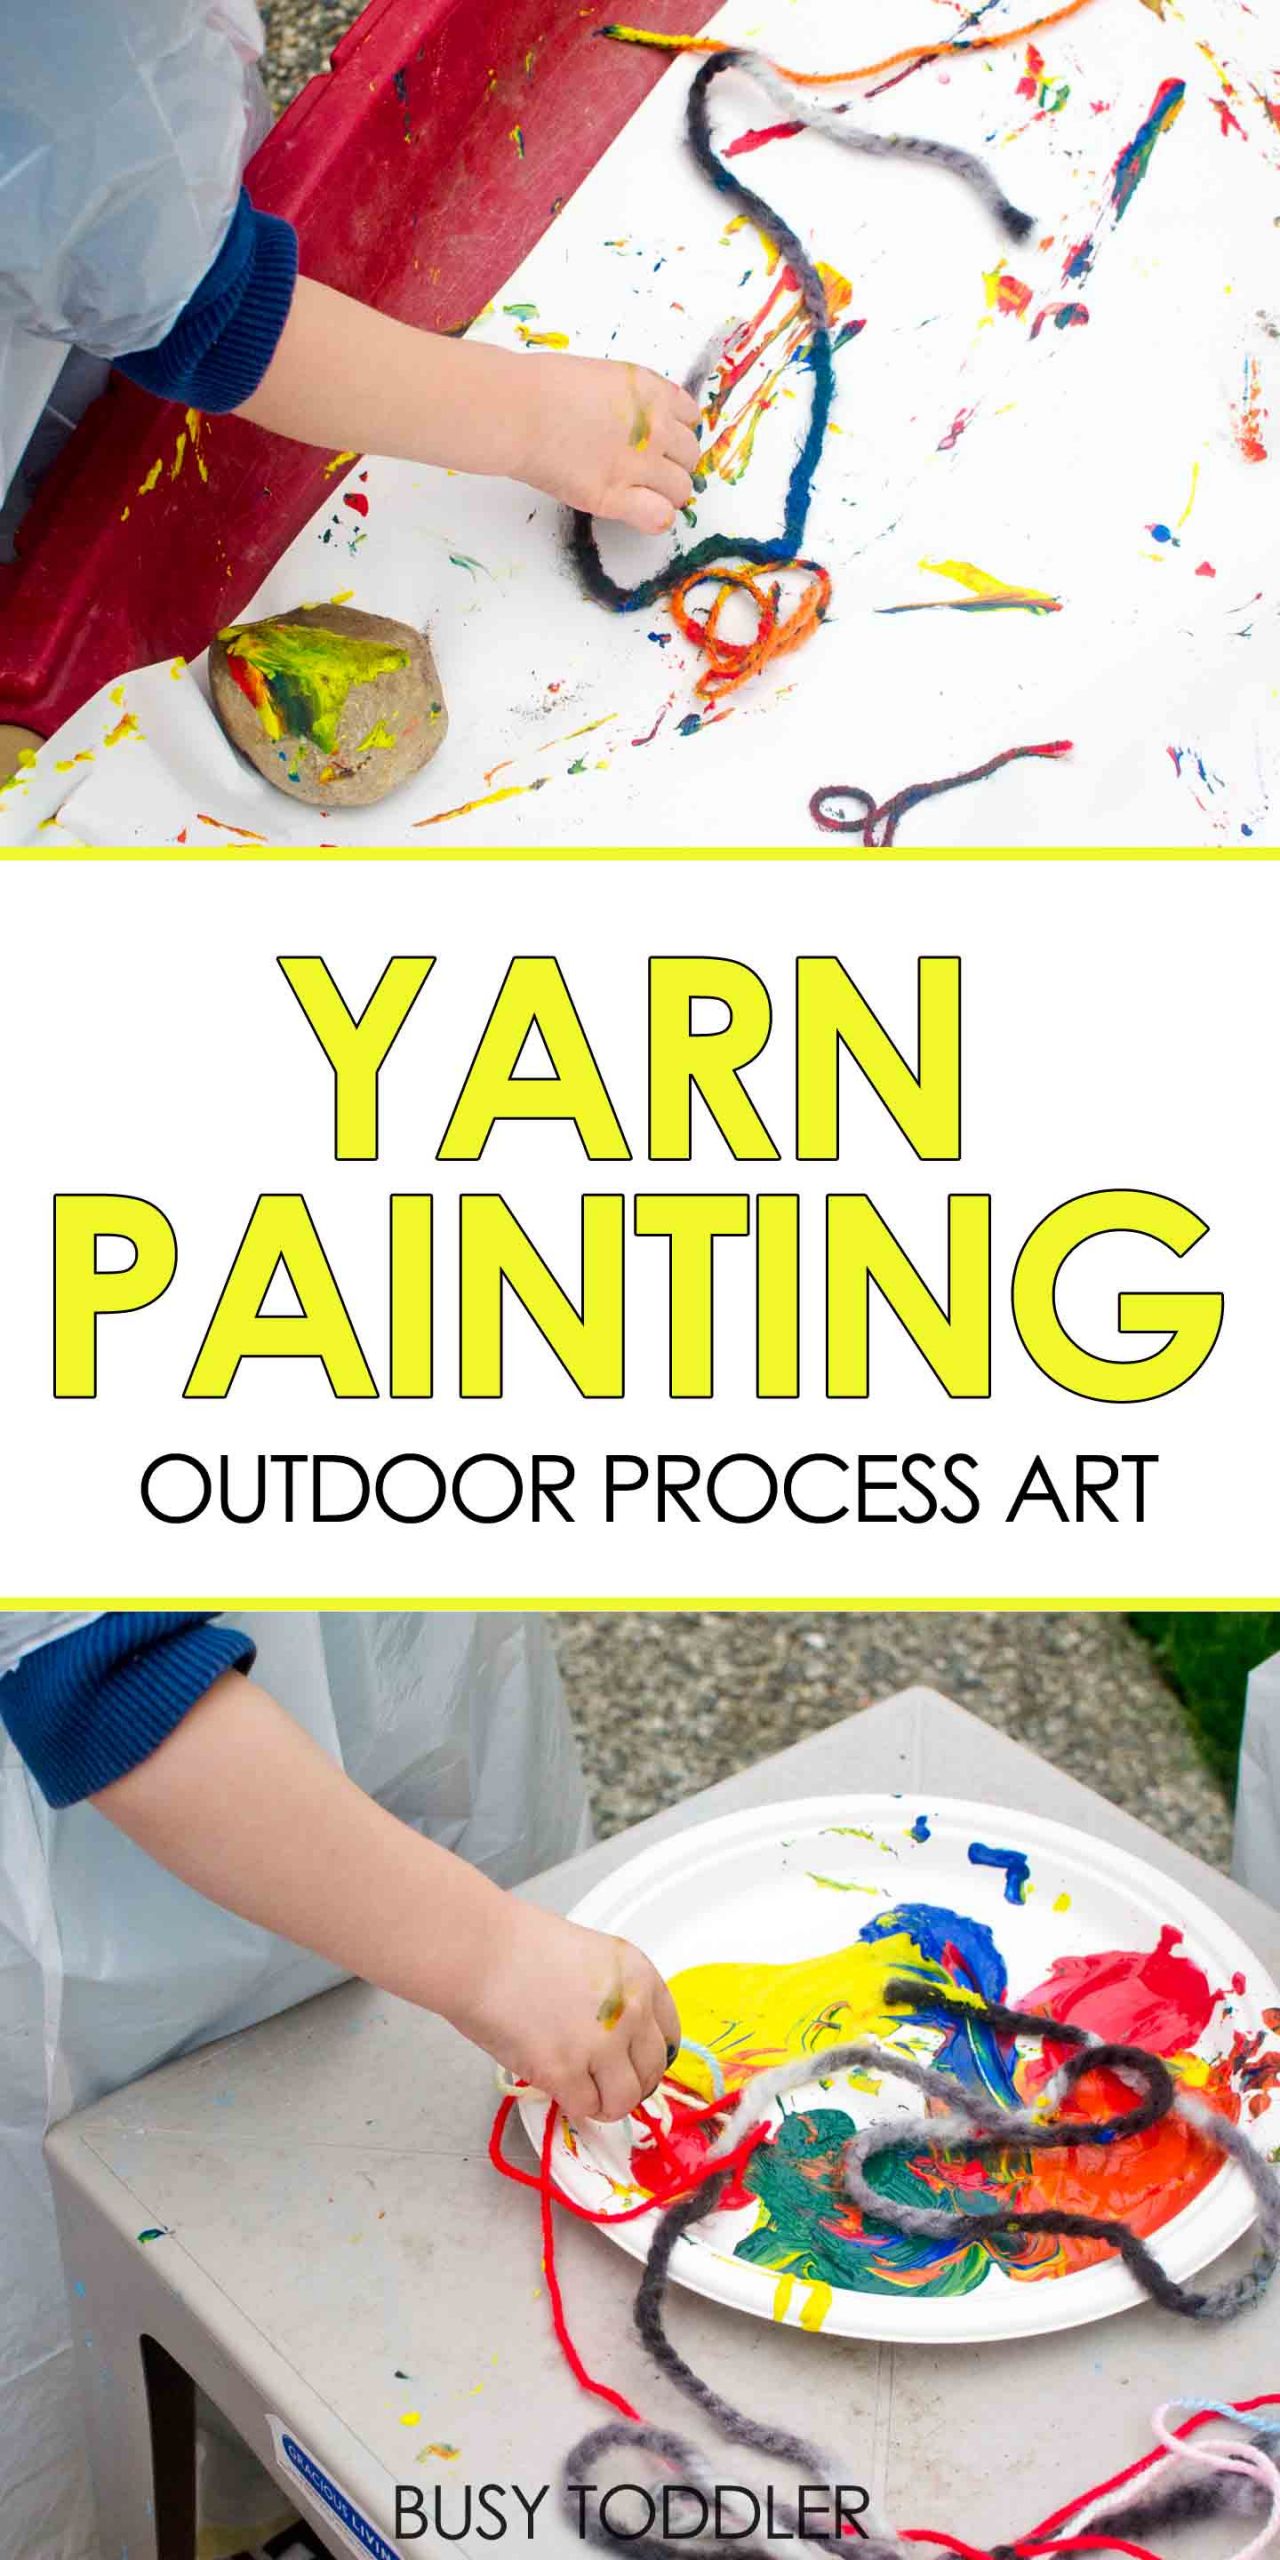 Craft Activities For Preschoolers
 Yarn Painting Outdoor Process Art Busy Toddler